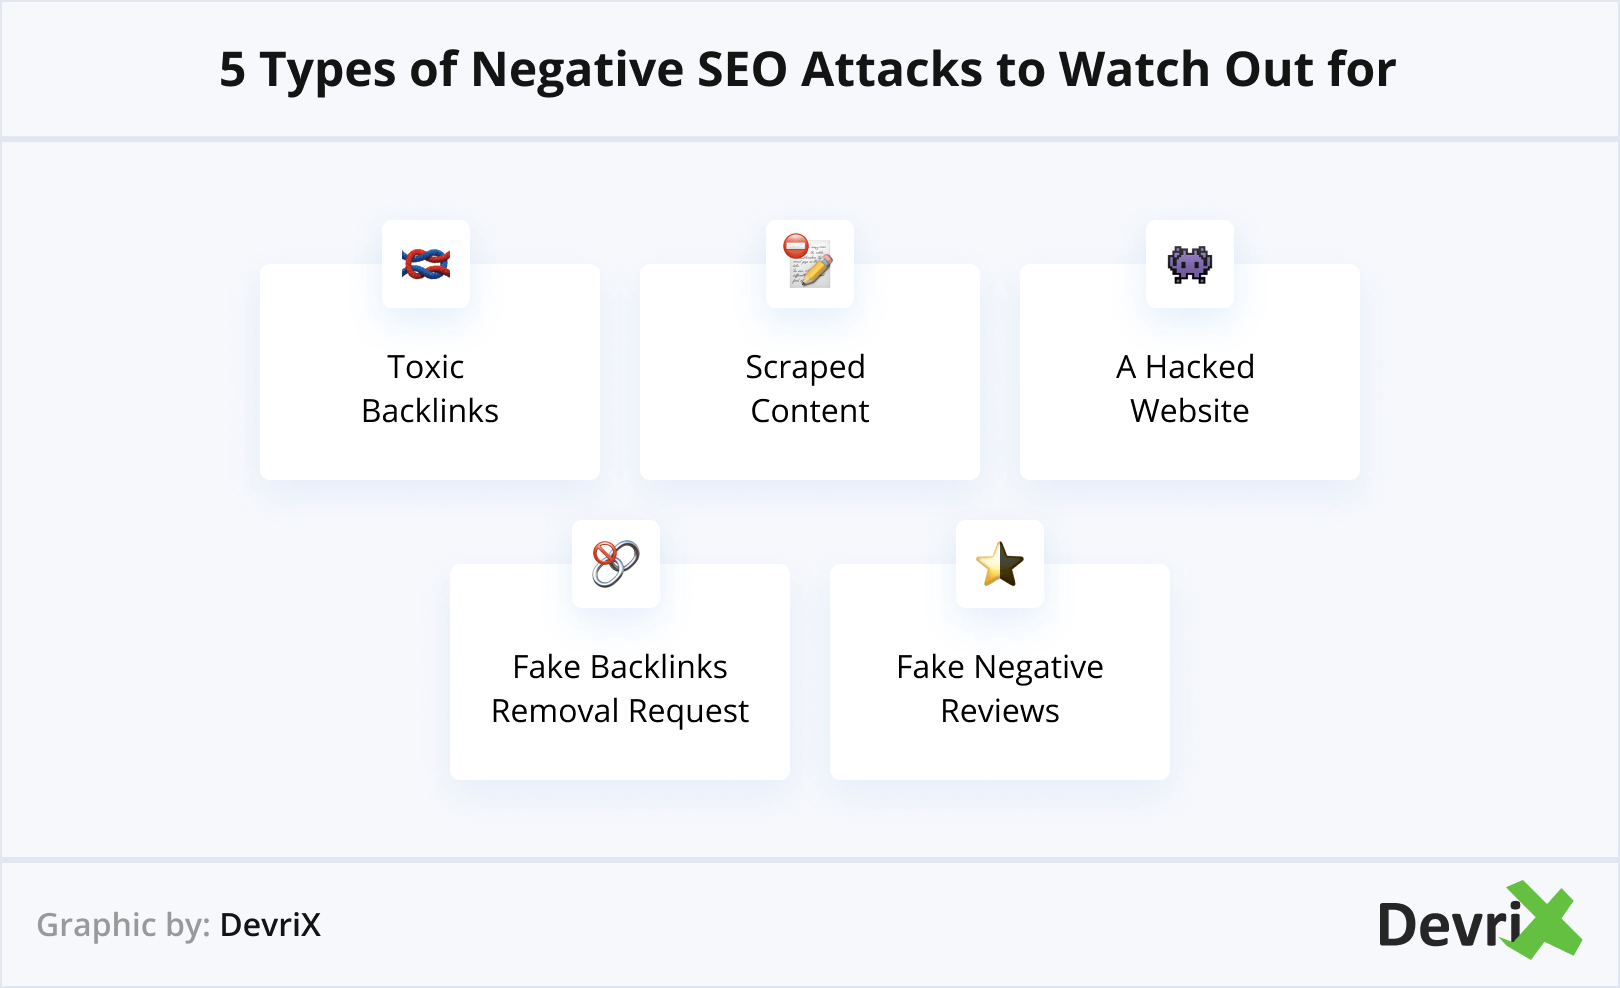 5 Types of Negative SEO Attacks to Watch Out for